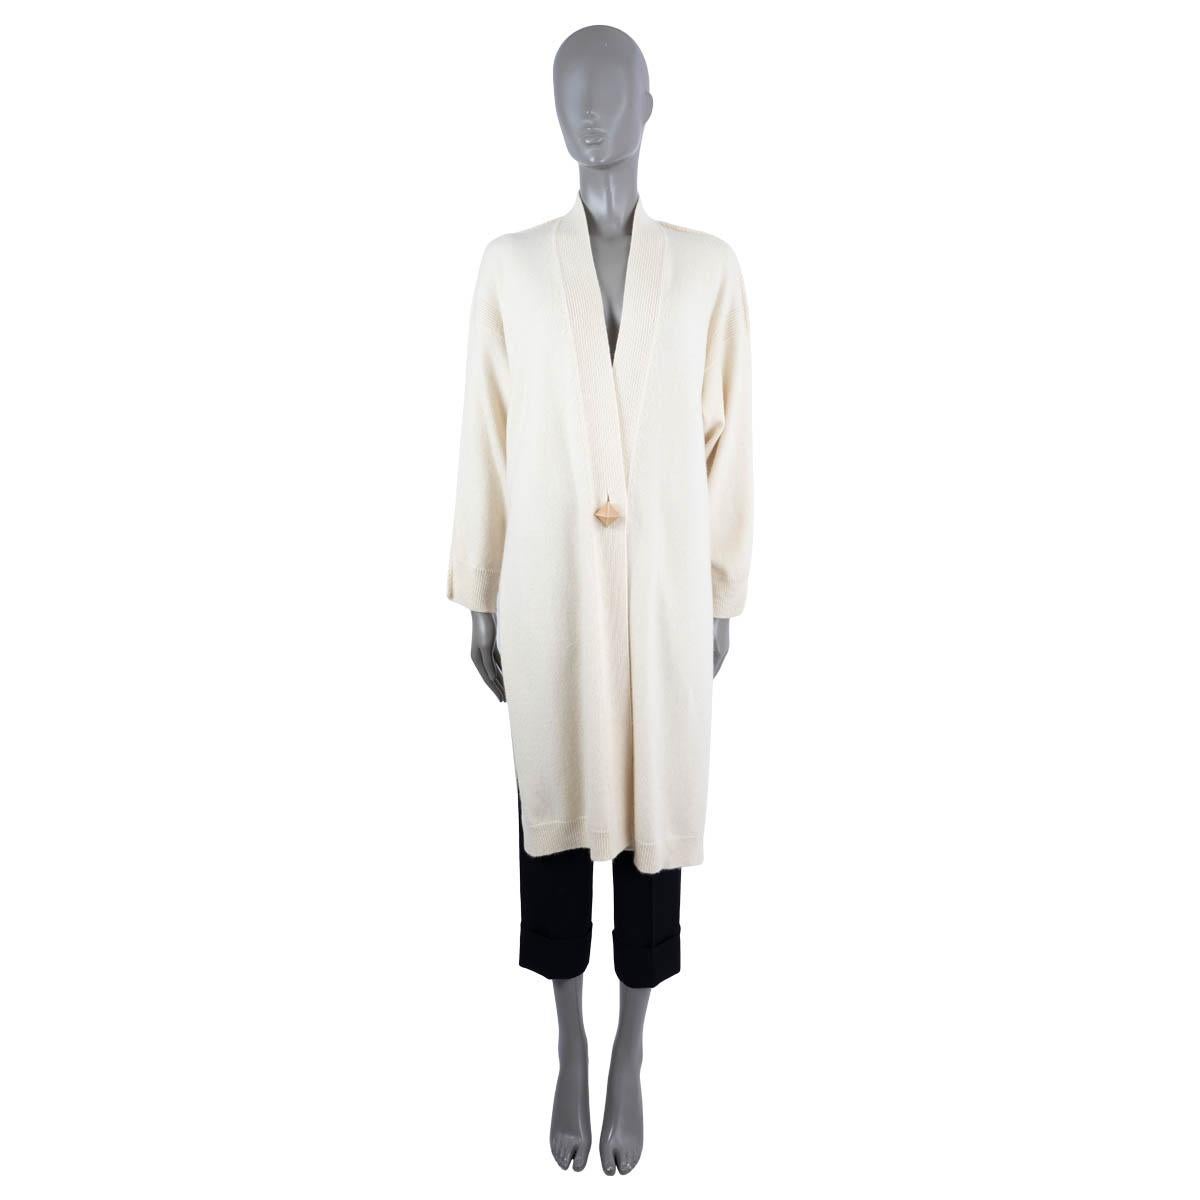 100% authentic Hermès long knit coat in ivory cashmere (100%). Features a rib-knit V-neck collar, hem and cuffs. Closes with a leather covered pyramid stud button. Unlined. Has been worn and is in excellent condition.

Measurements
Tag